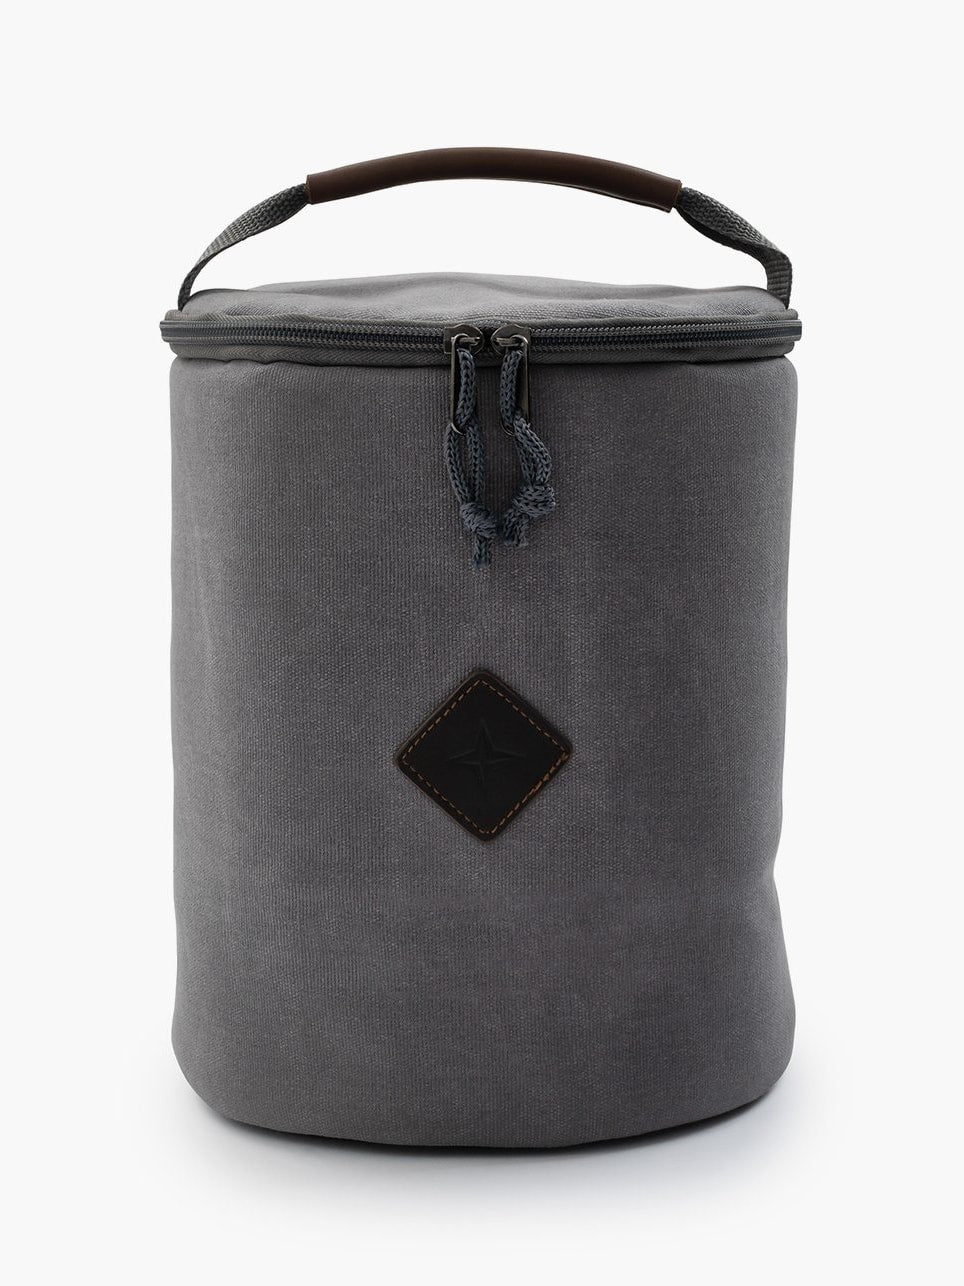 A Grey Lantern Storage Bag – Waxed Canvas cooler bag with a leather handle by Barebones.